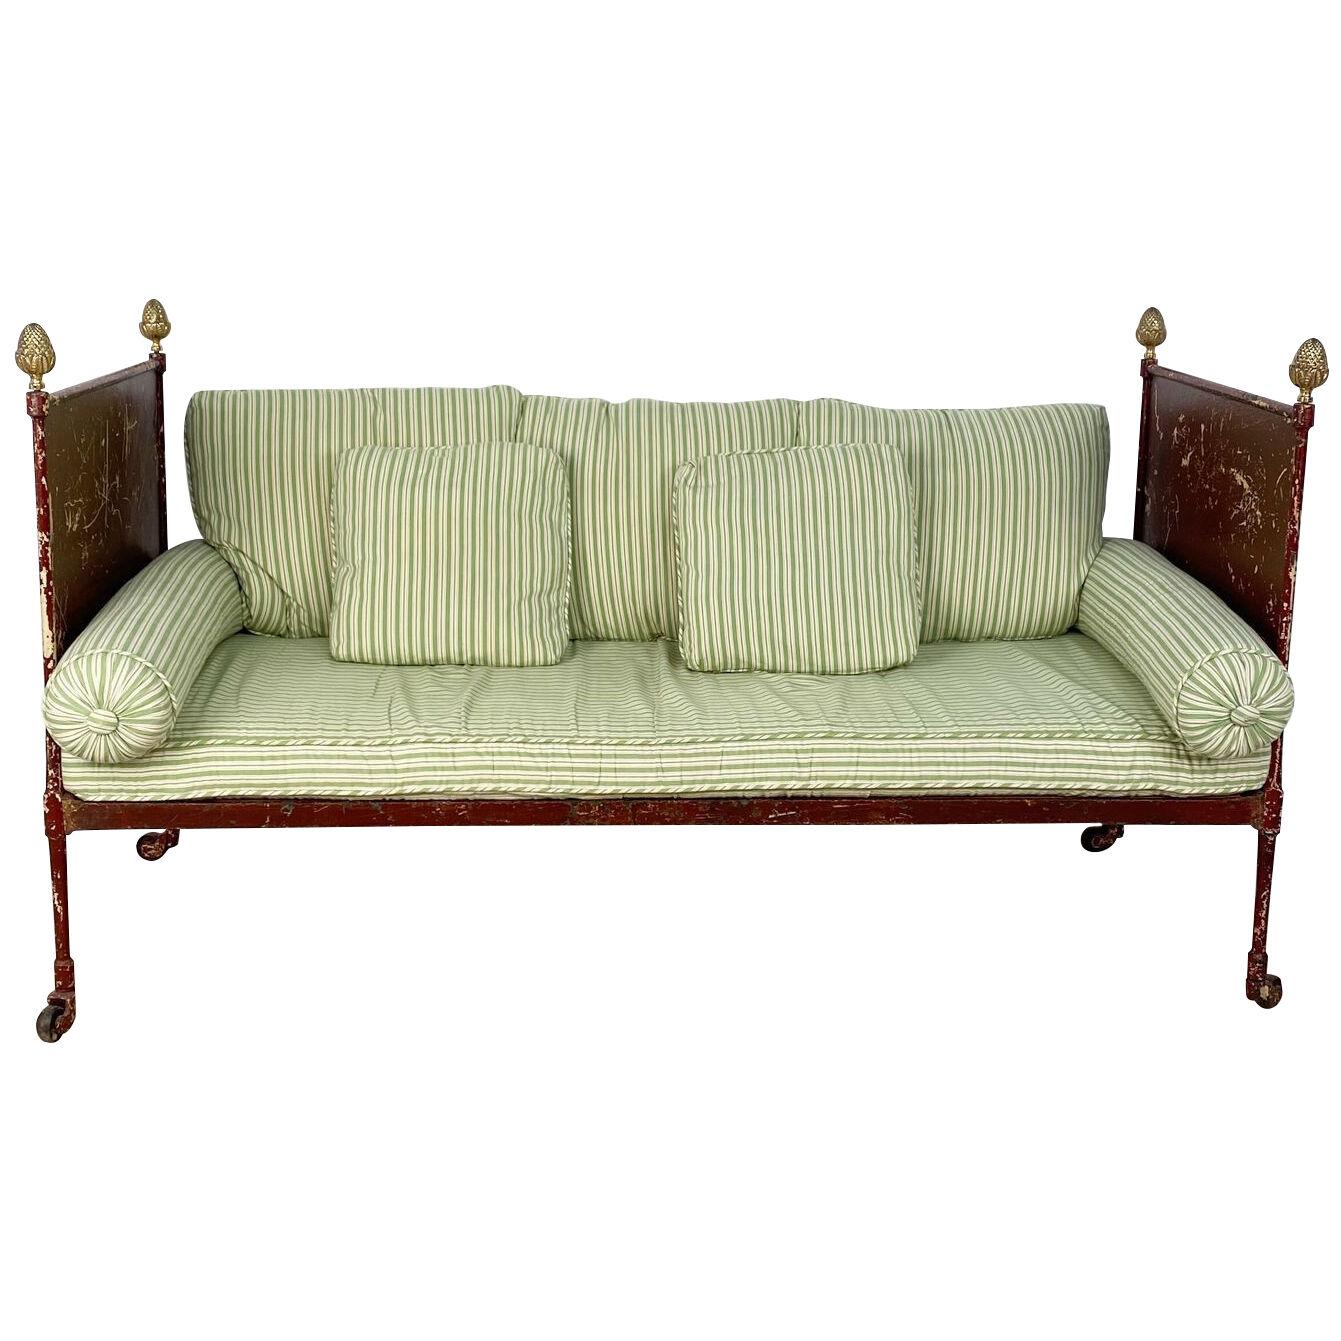 19th Century Painted Metal Tole French Campaign Bed, circa 1830